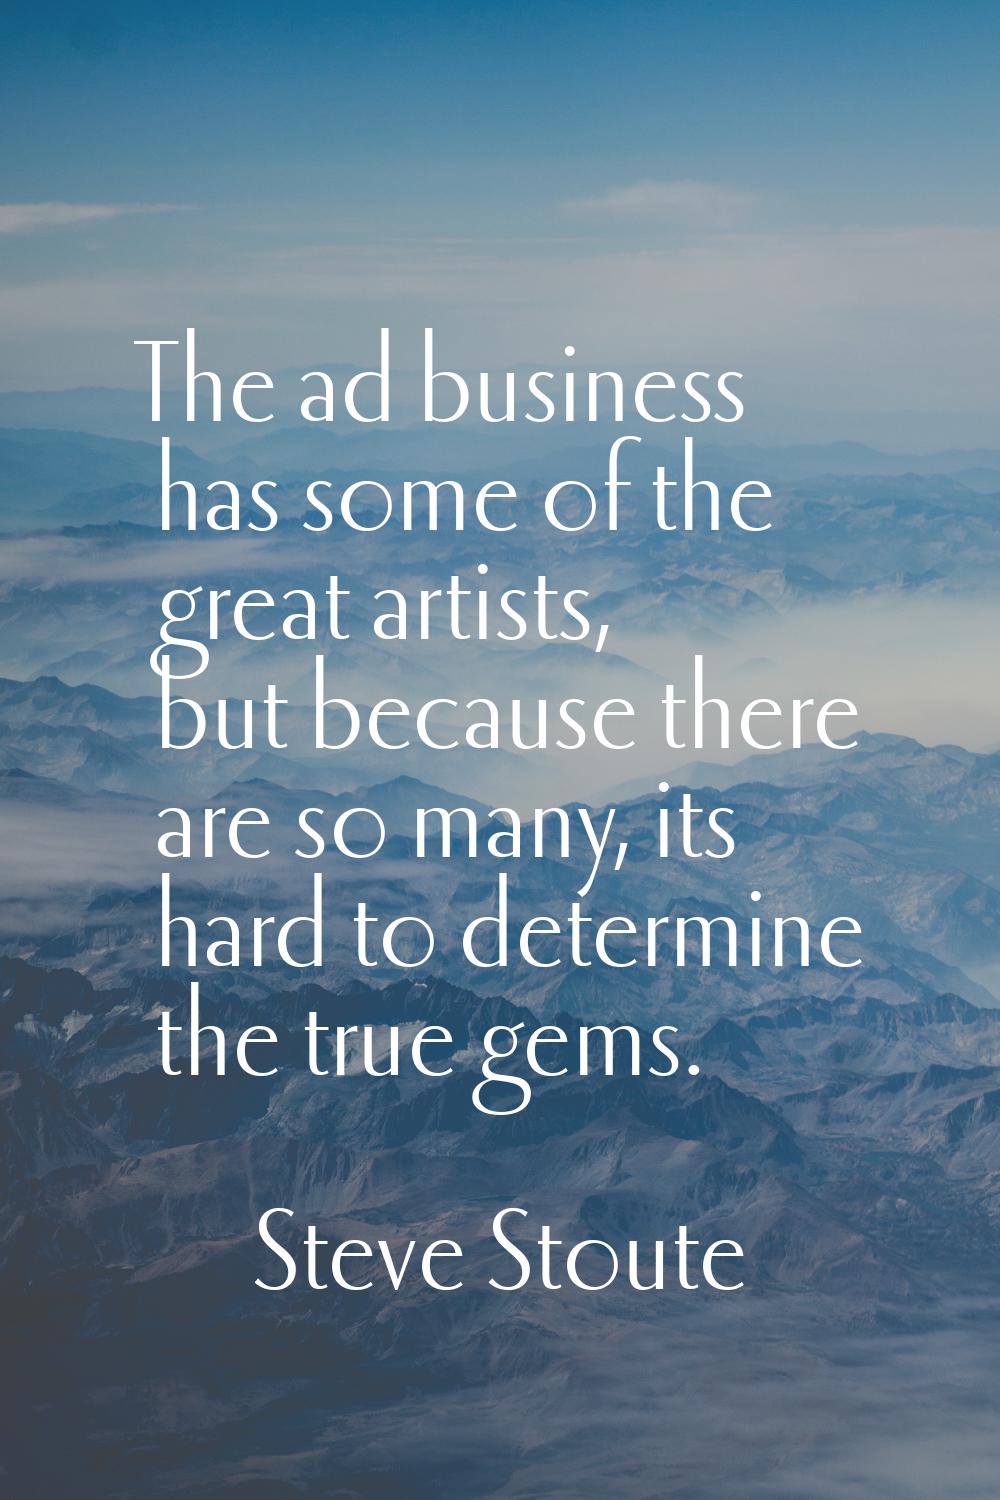 The ad business has some of the great artists, but because there are so many, its hard to determine